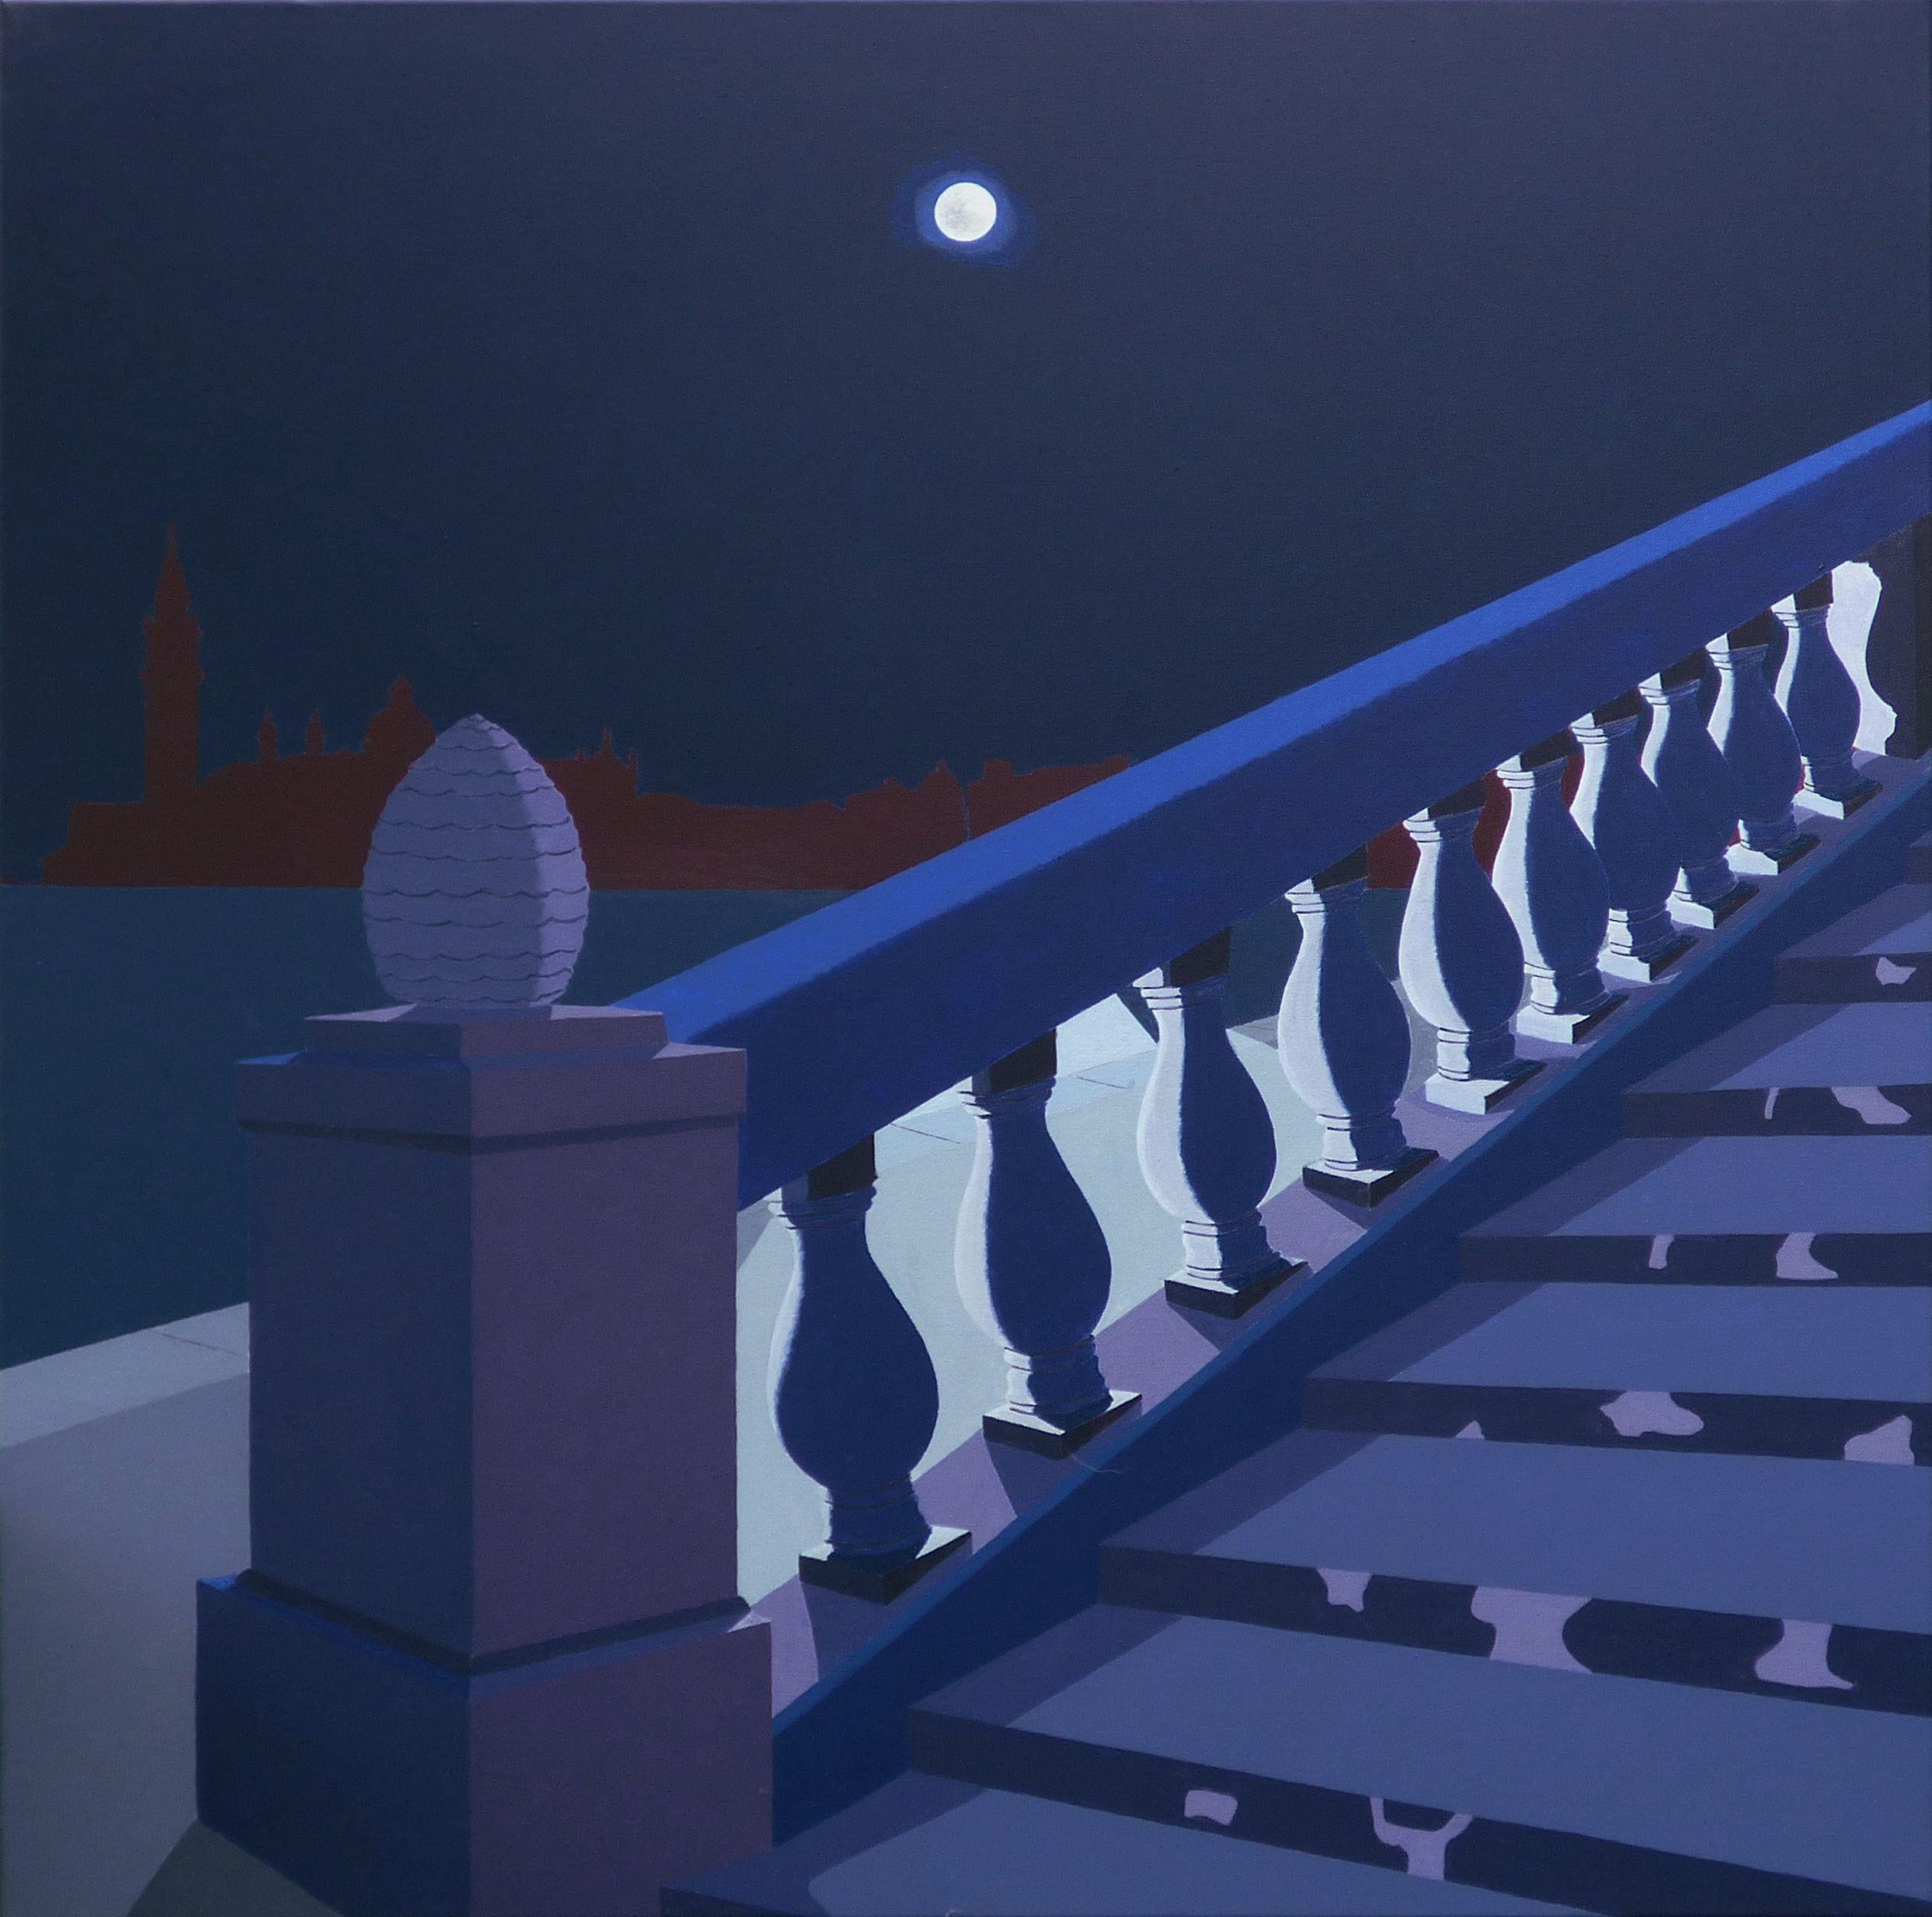 Hard-edge realism. Stone staircase in moonlight. :: Painting :: Realism :: This piece comes with an official certificate of authenticity signed by the artist :: Ready to Hang: Yes :: Signed: No :: :: Canvas :: Diagonal :: Original :: Framed: No